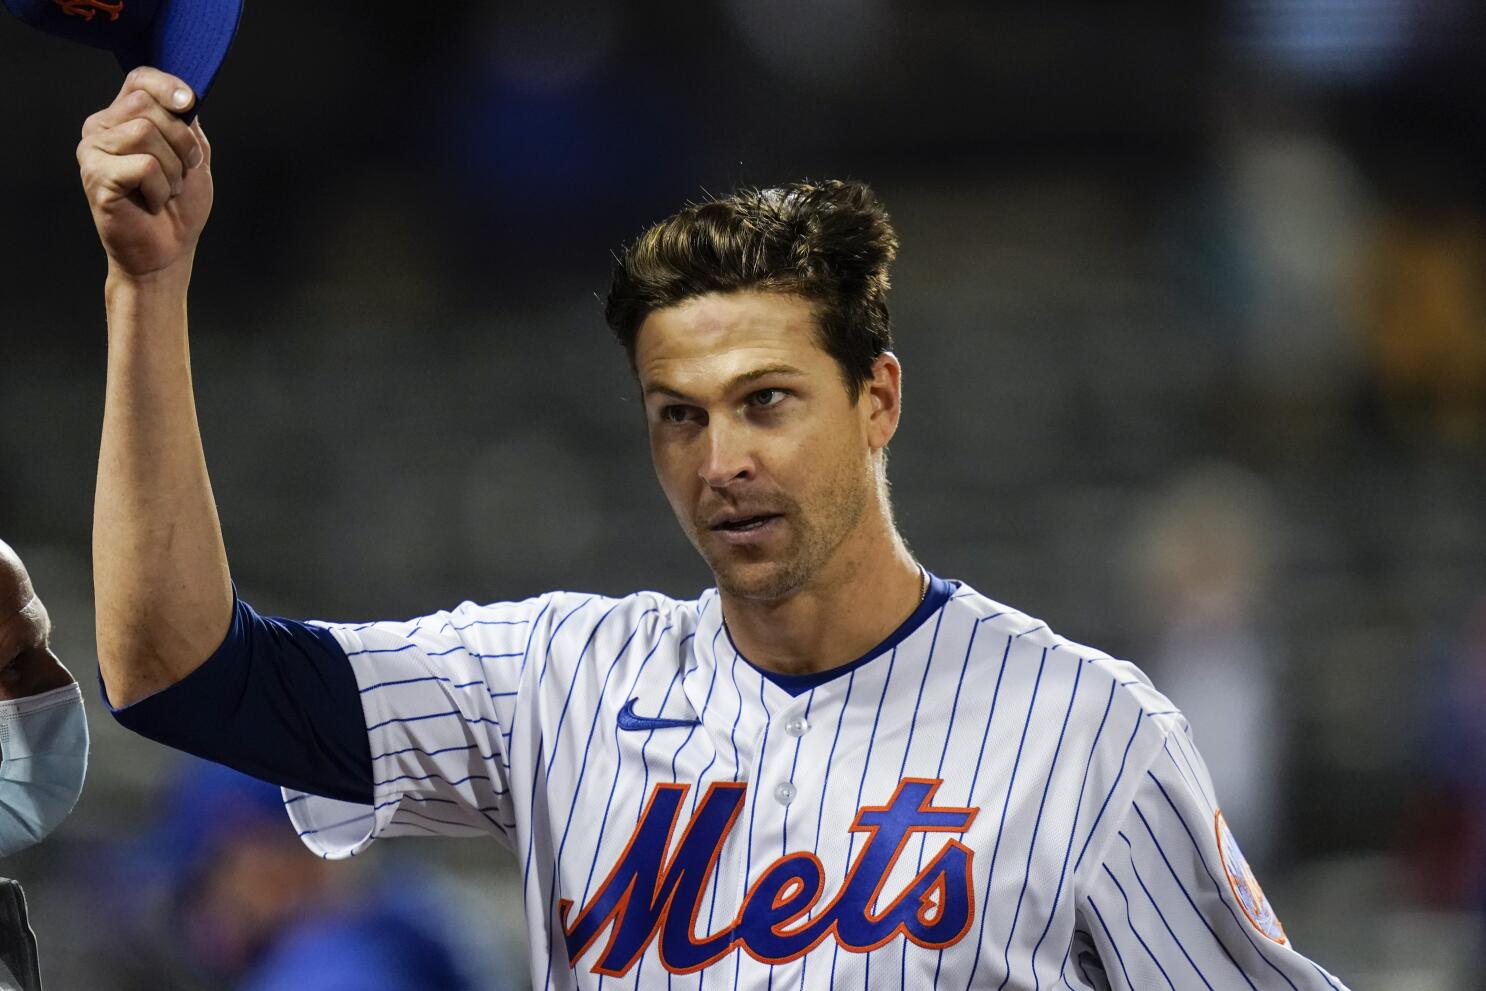 Jacob deGrom strikes out 15, allows two hits in Mets' win - Los